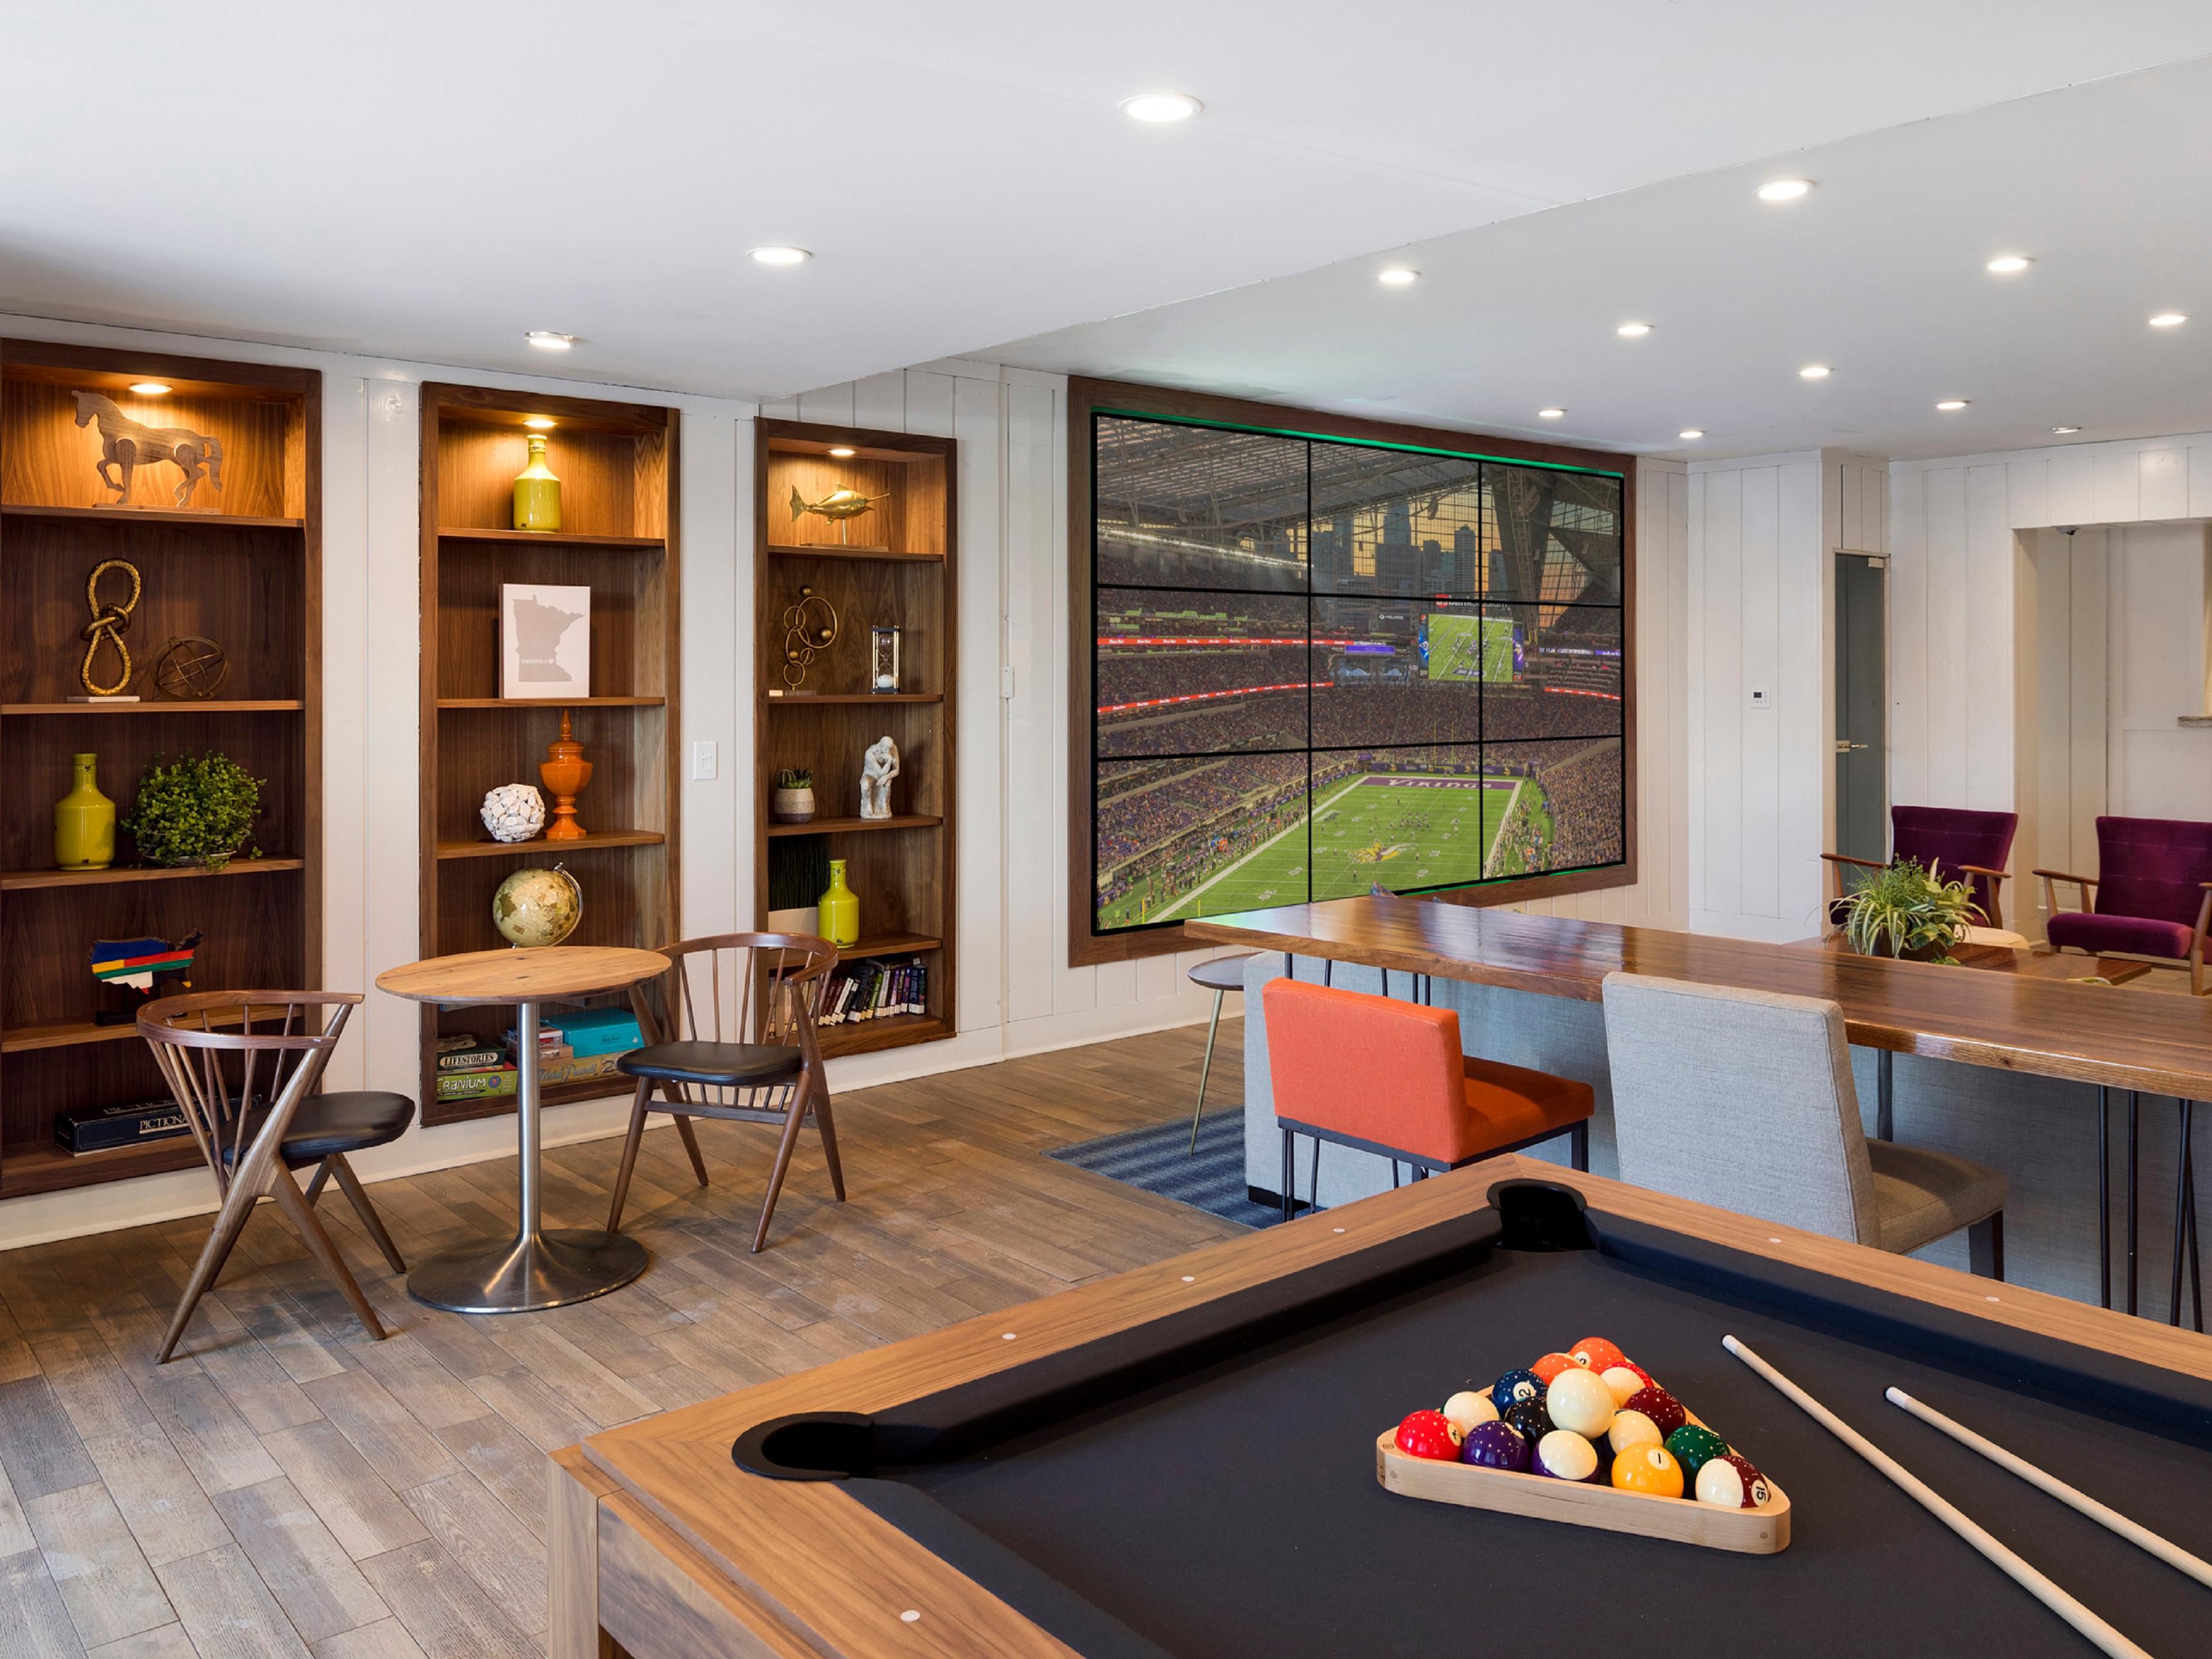 Guests can enjoy a game of billiards or relax on our comfortable couches in front of a 9' HDTV!